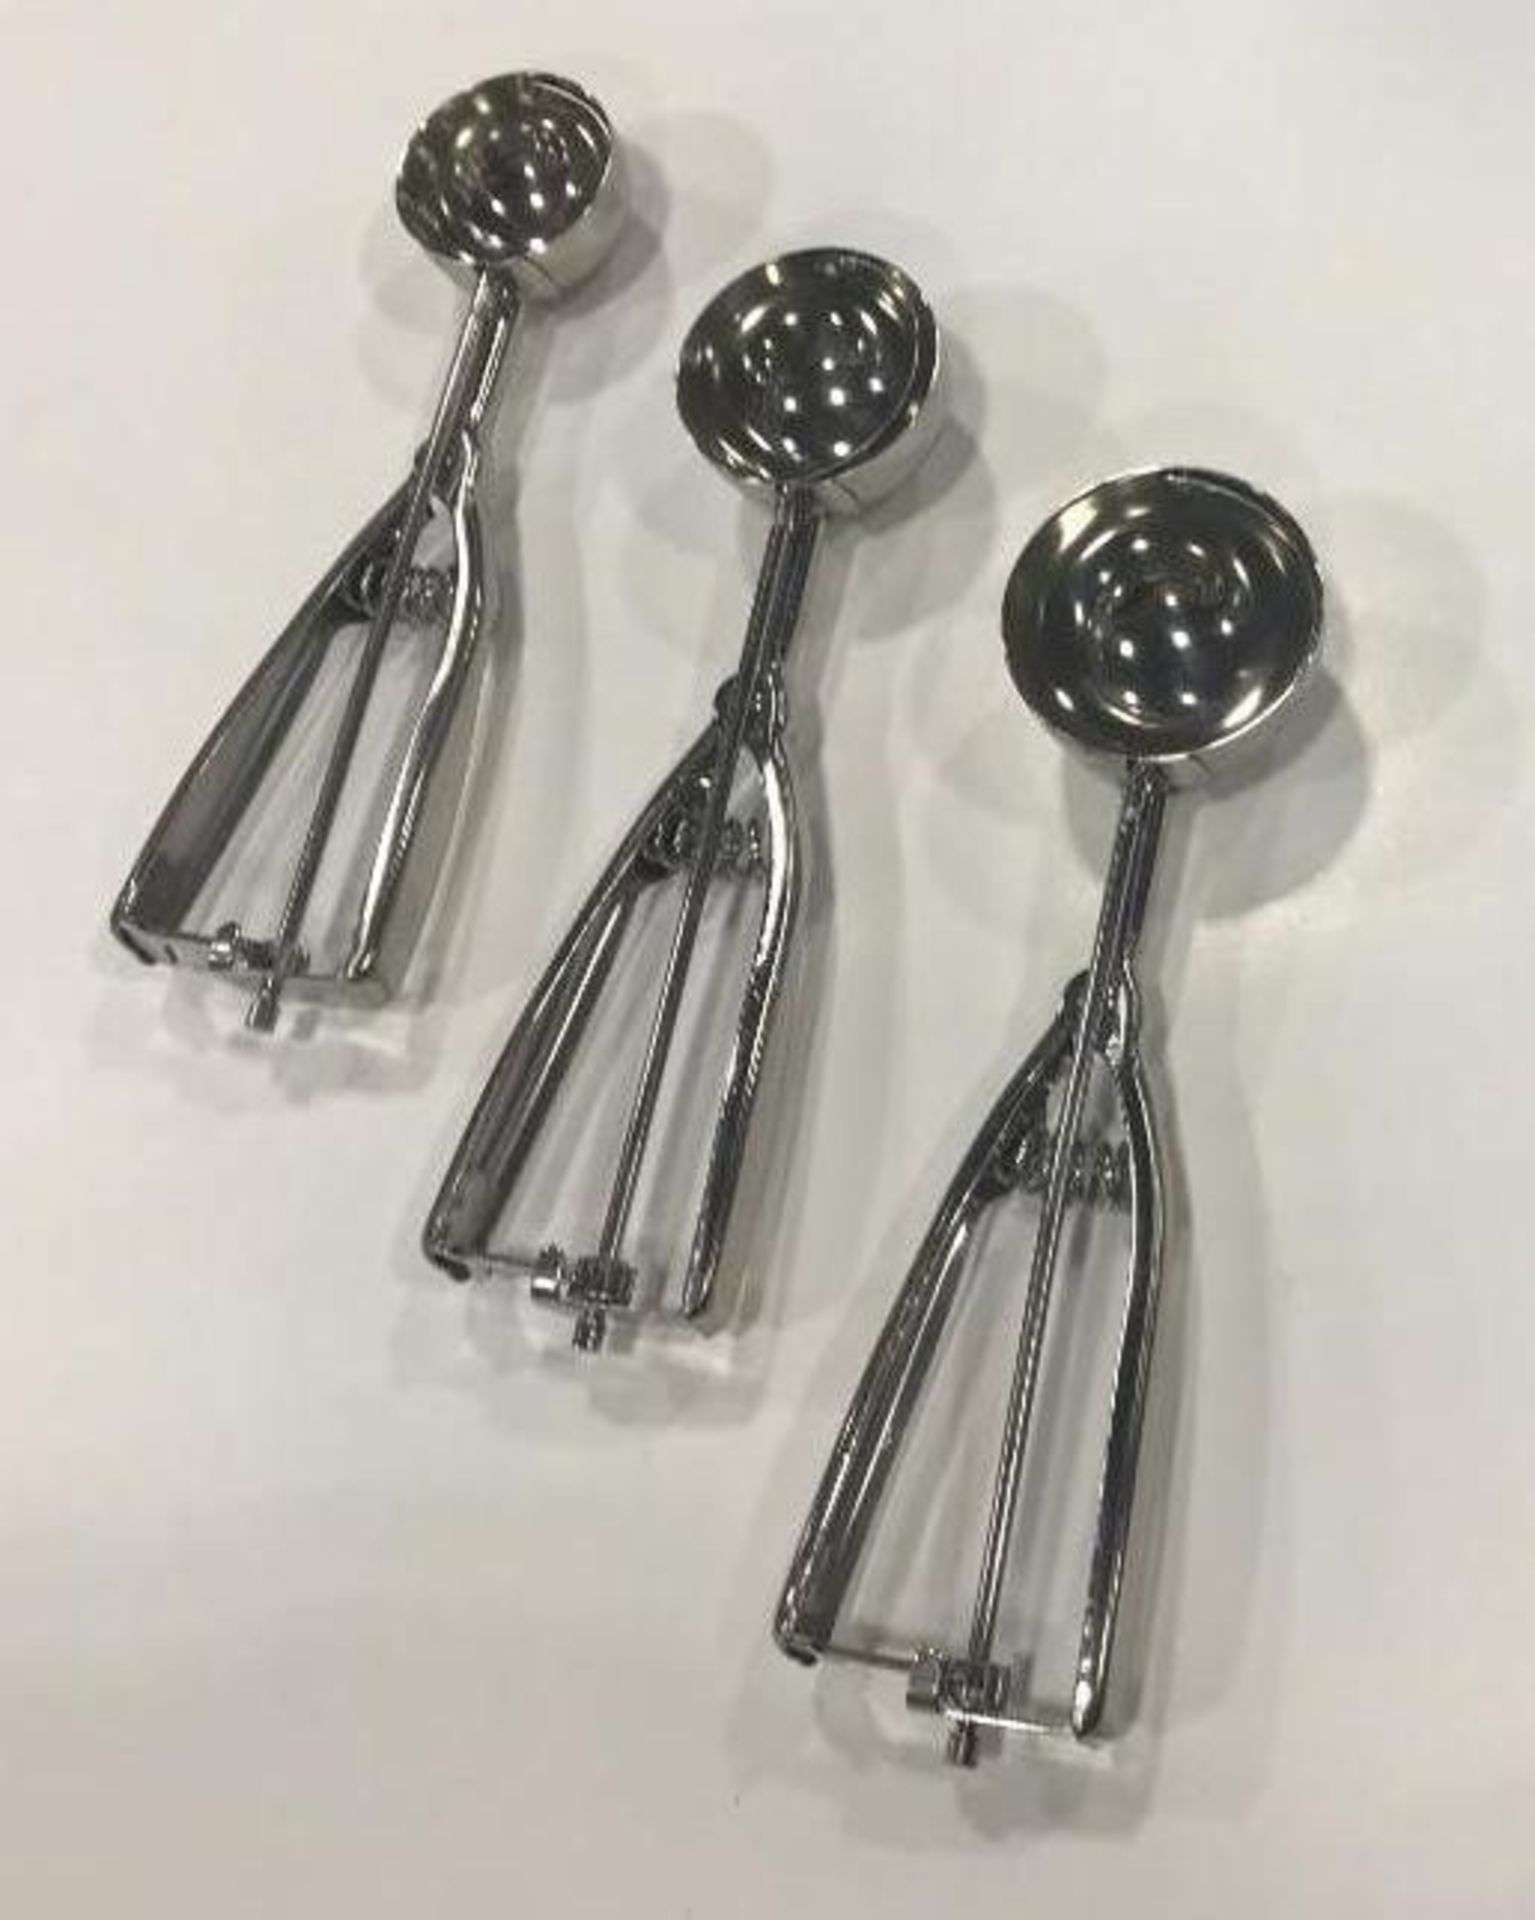 JOHNSON ROSE PORTION CONTROL SCOOPS - LOT OF 3 - NEW - Image 4 of 5